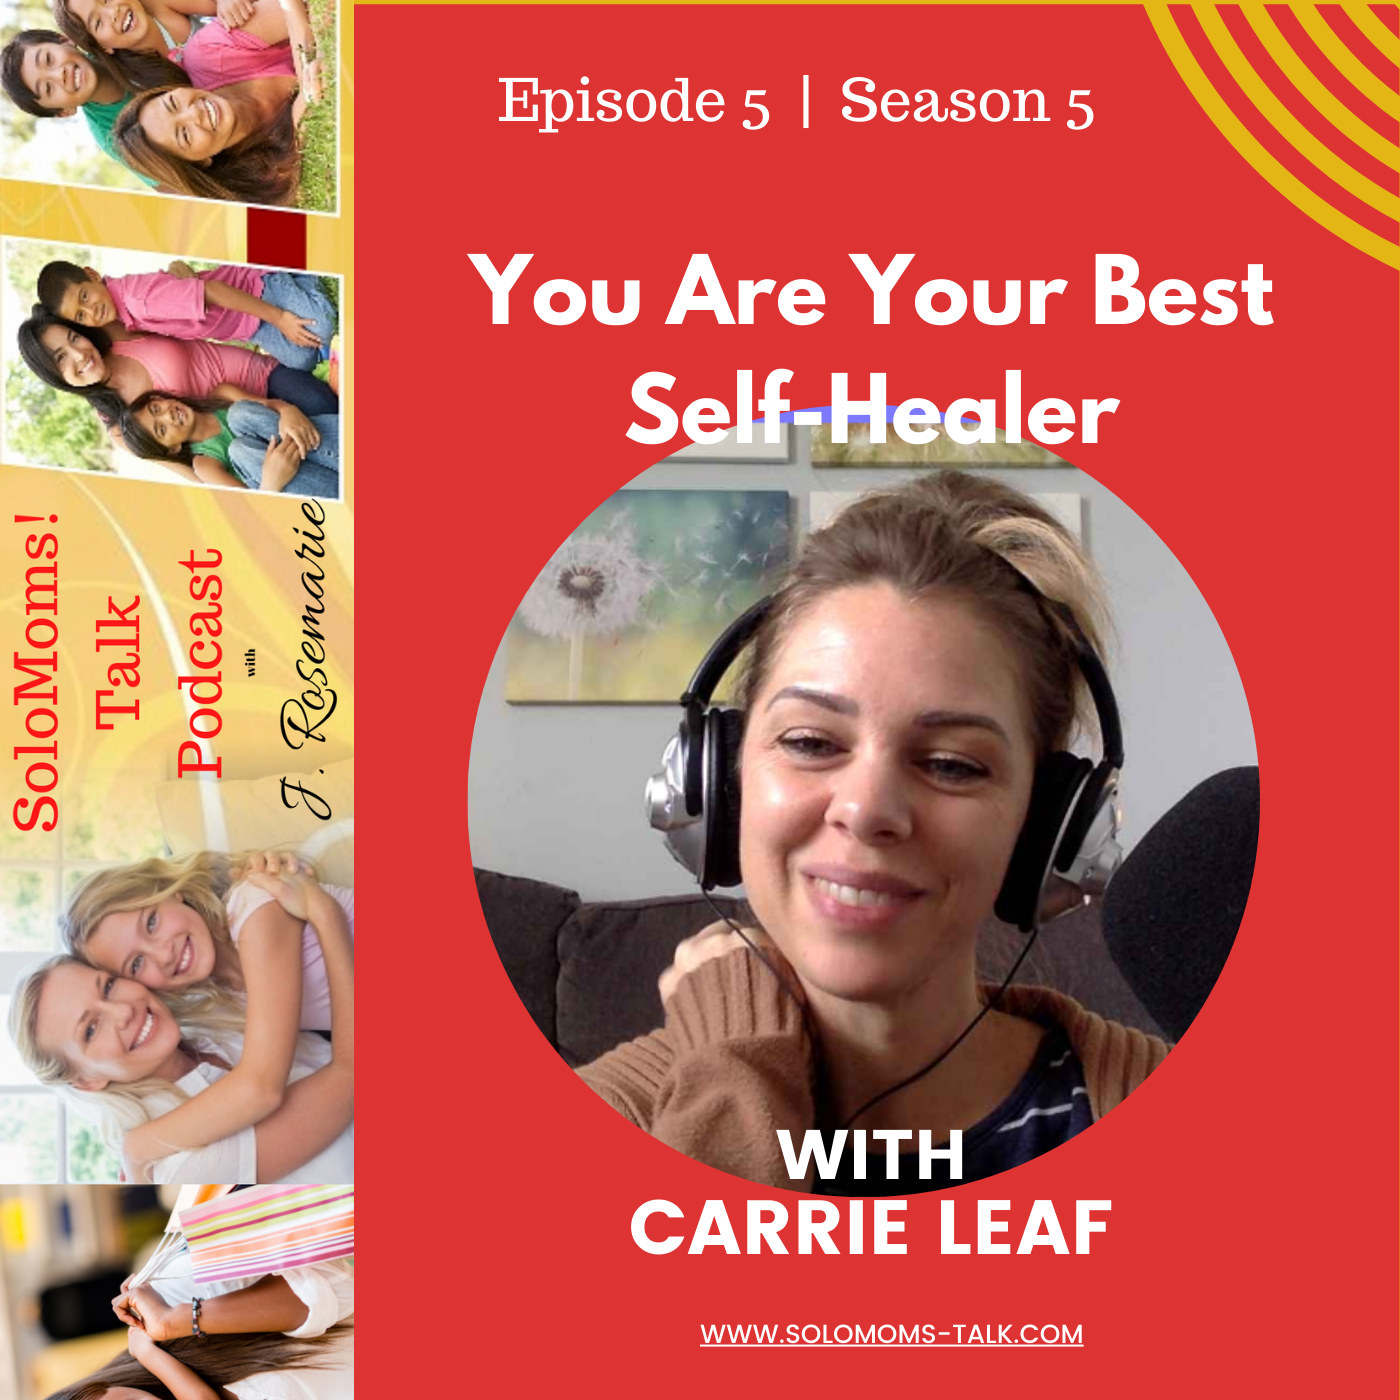 You Are Your Best Self-Healer w/Carrie Leaf